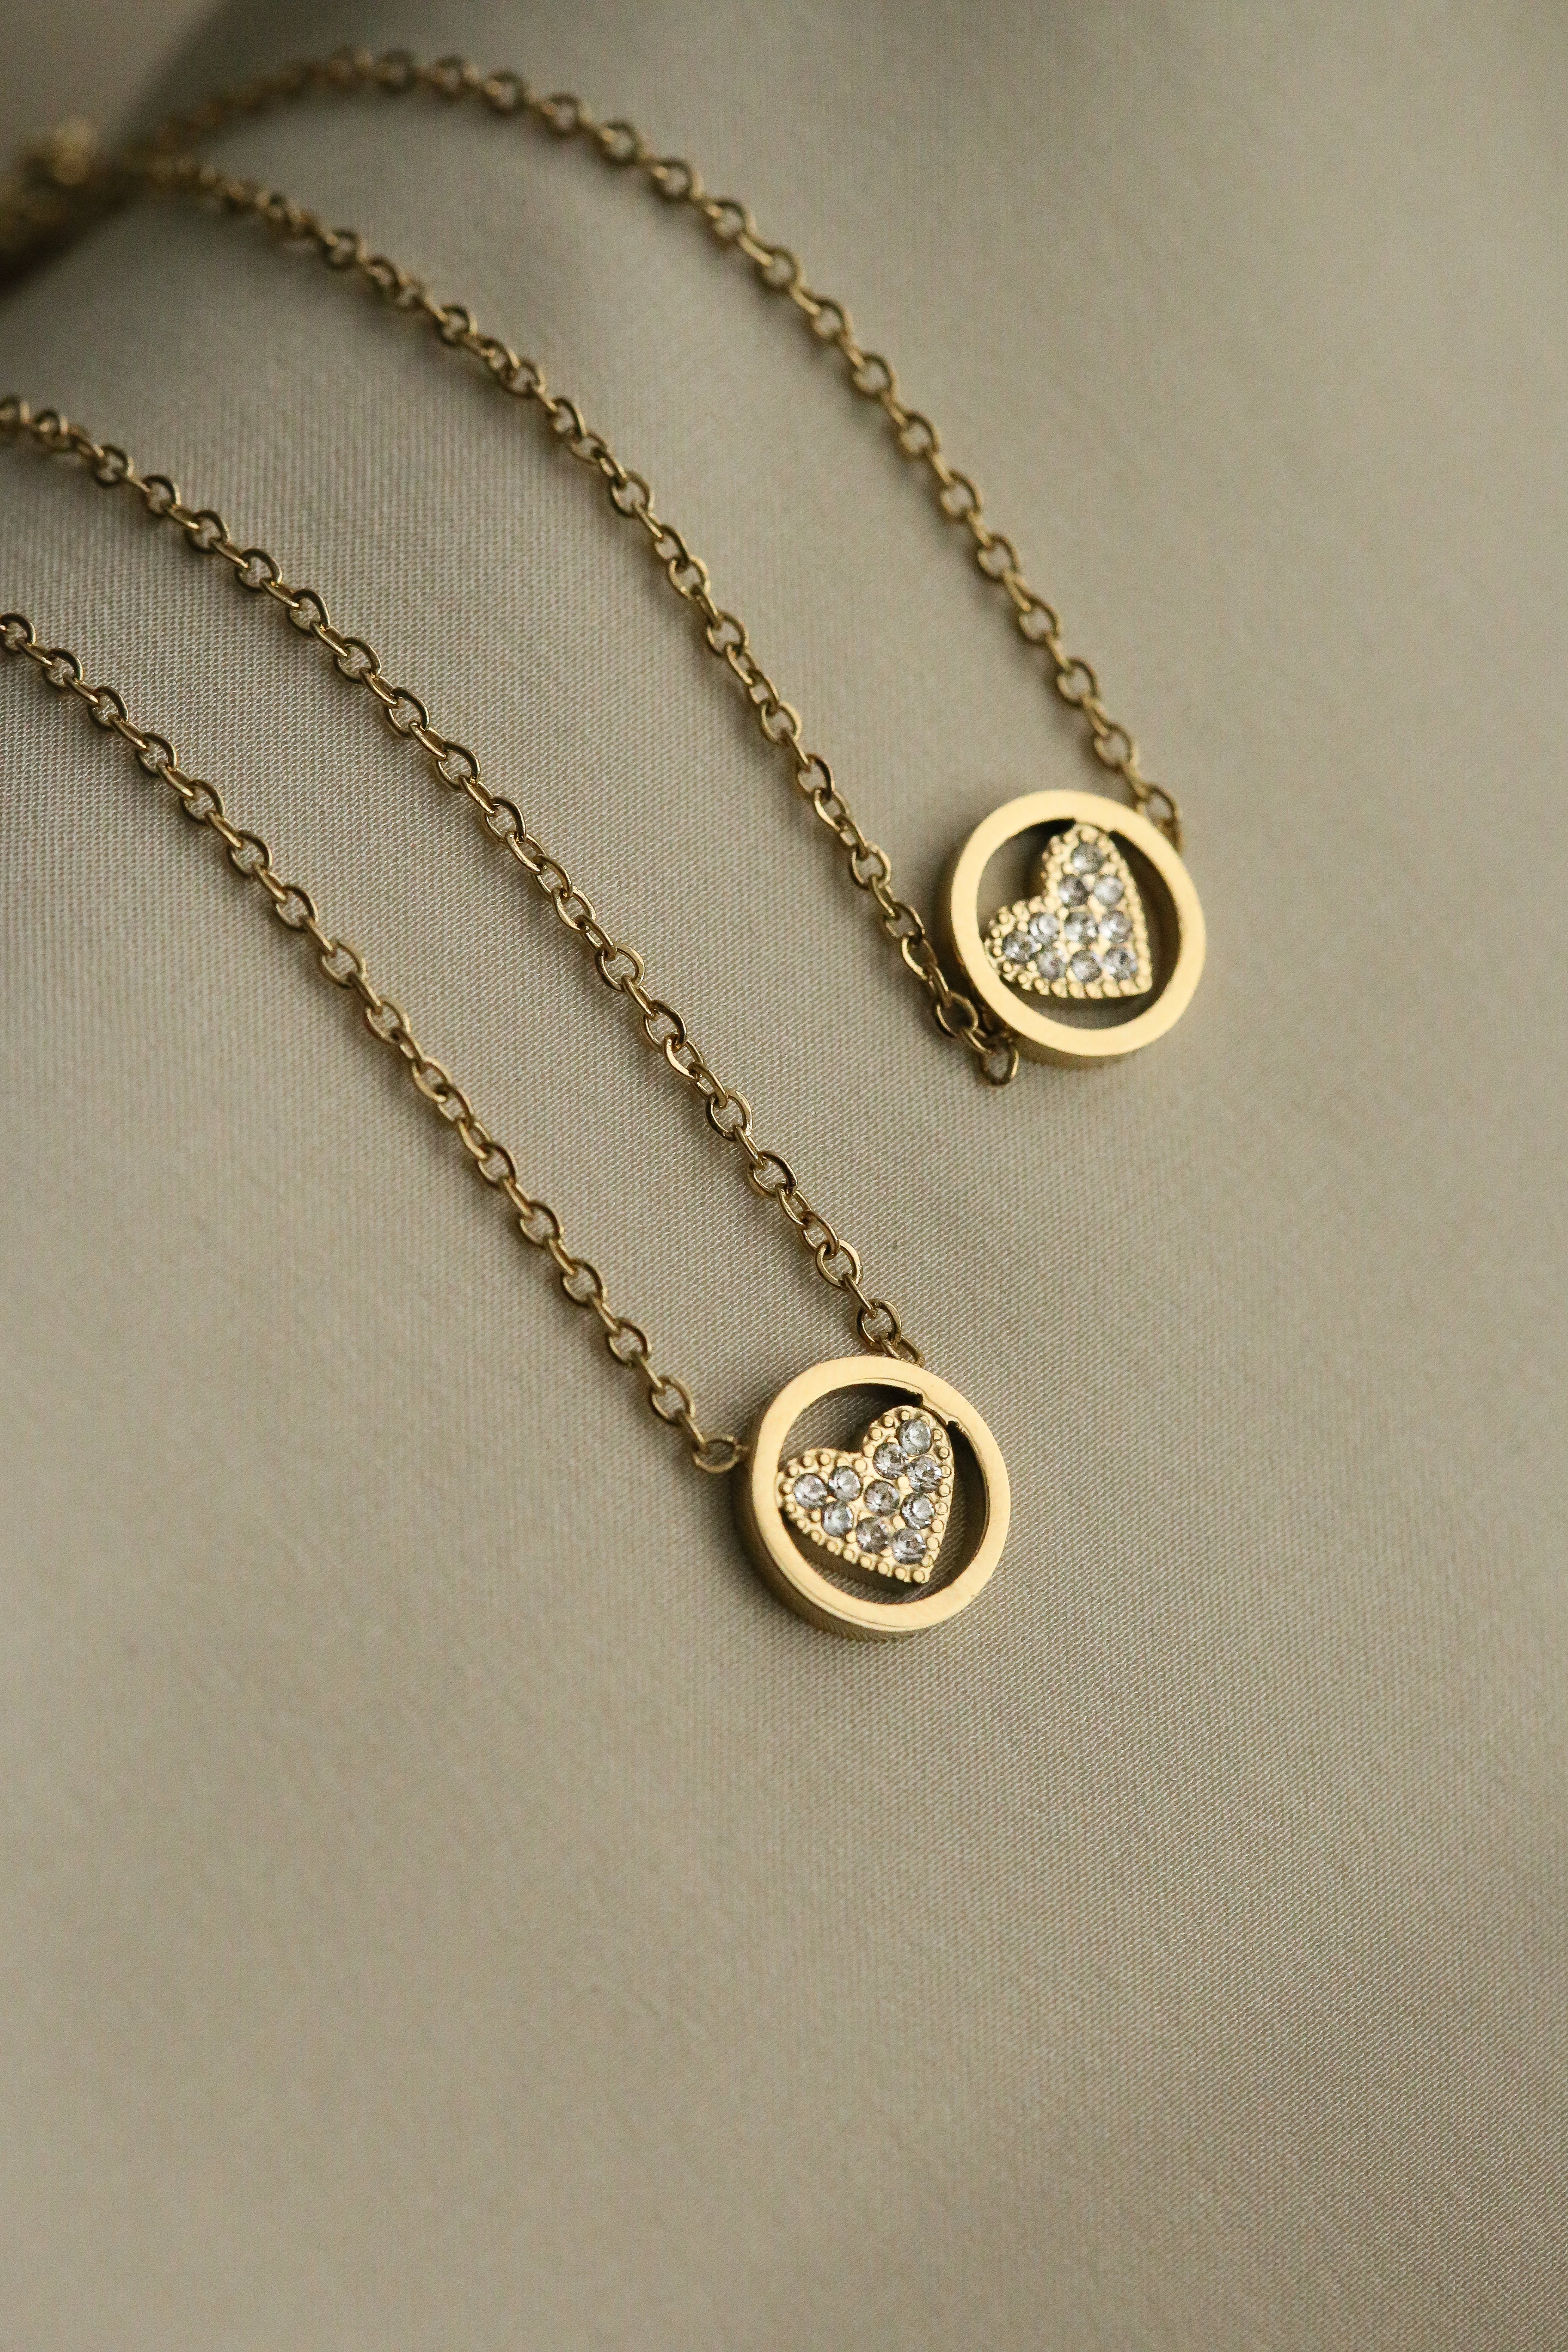 Rosie Necklace - Boutique Minimaliste has waterproof, durable, elegant and vintage inspired jewelry